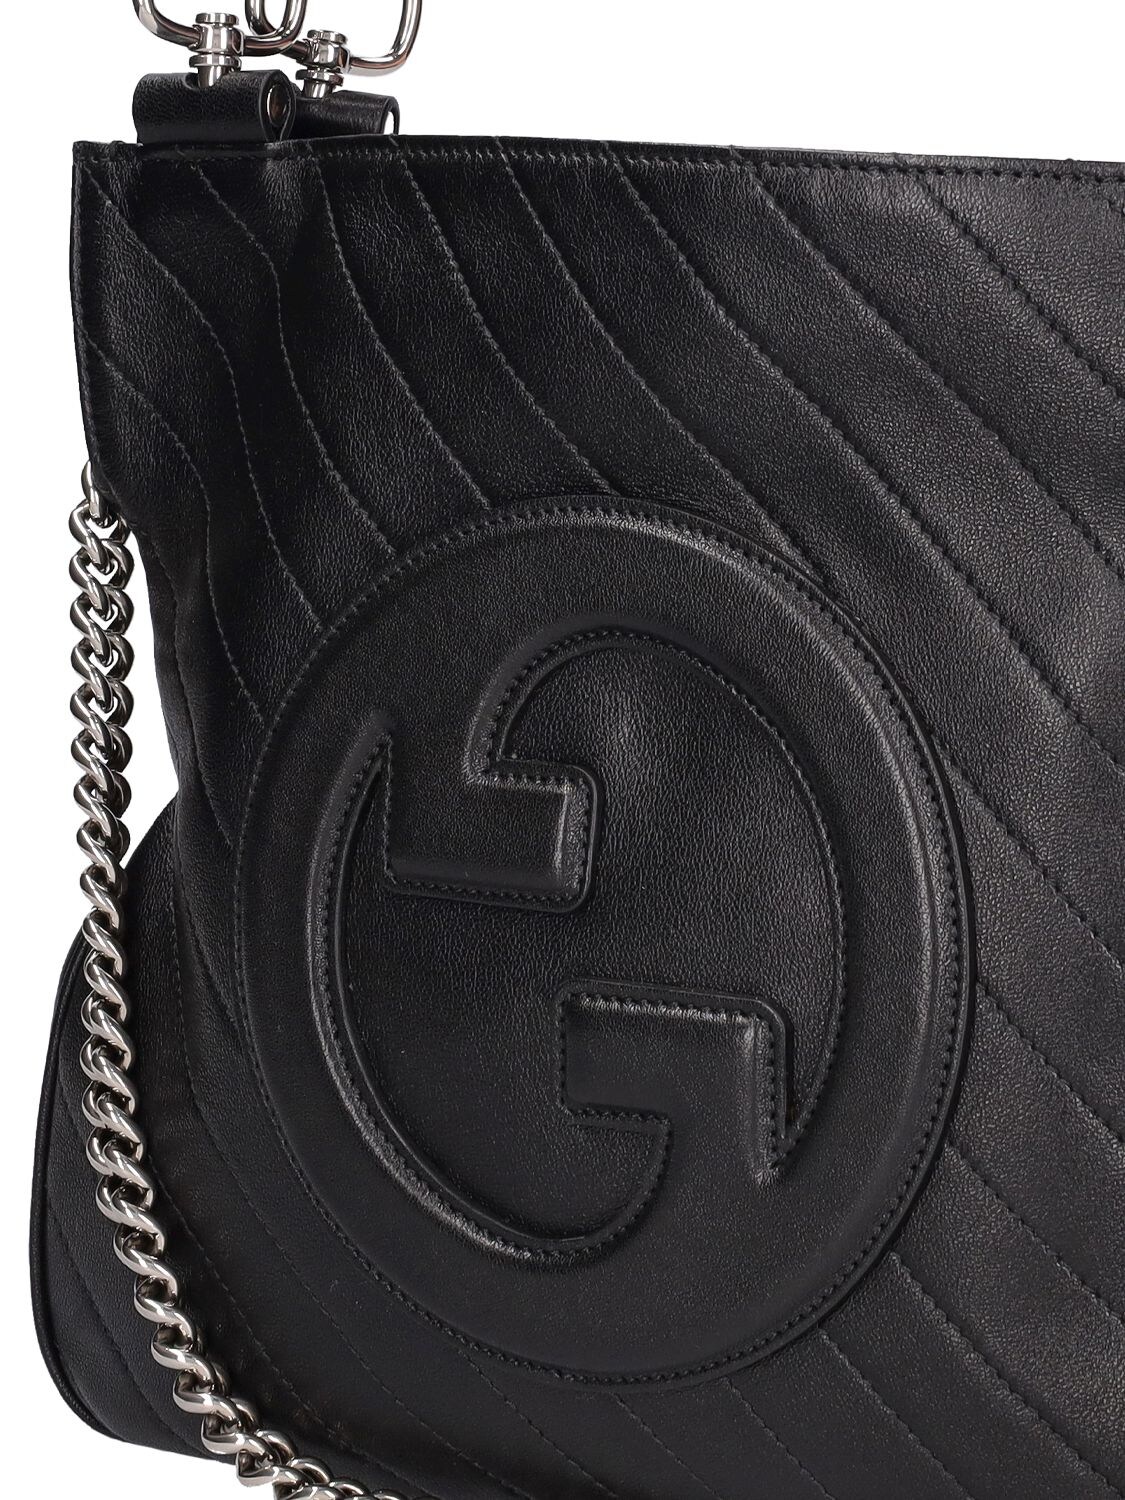 Gucci Blondie Small Leather Tote Bag in Black - Gucci